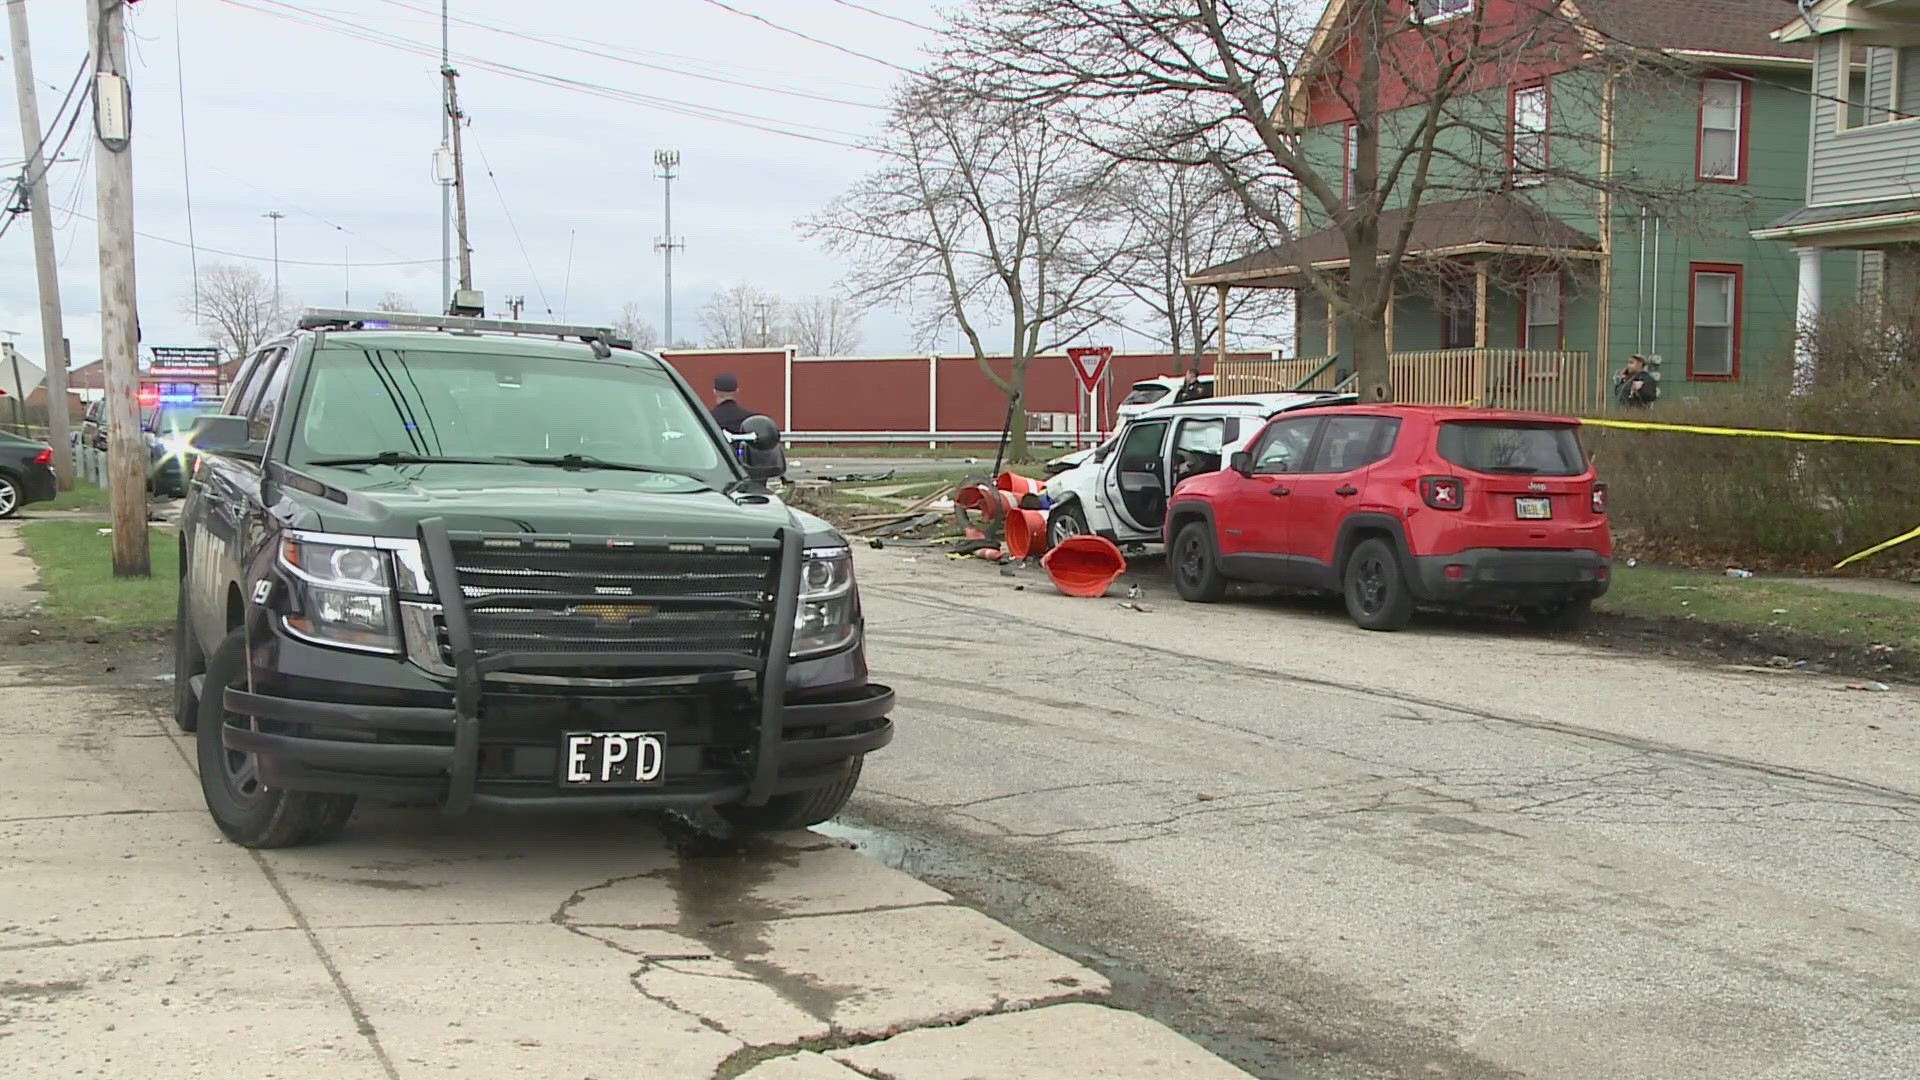 Euclid police say one of their patrol officers was attempting to pull over a vehicle in connection to a robbery when the suspect vehicle crashed into another car.